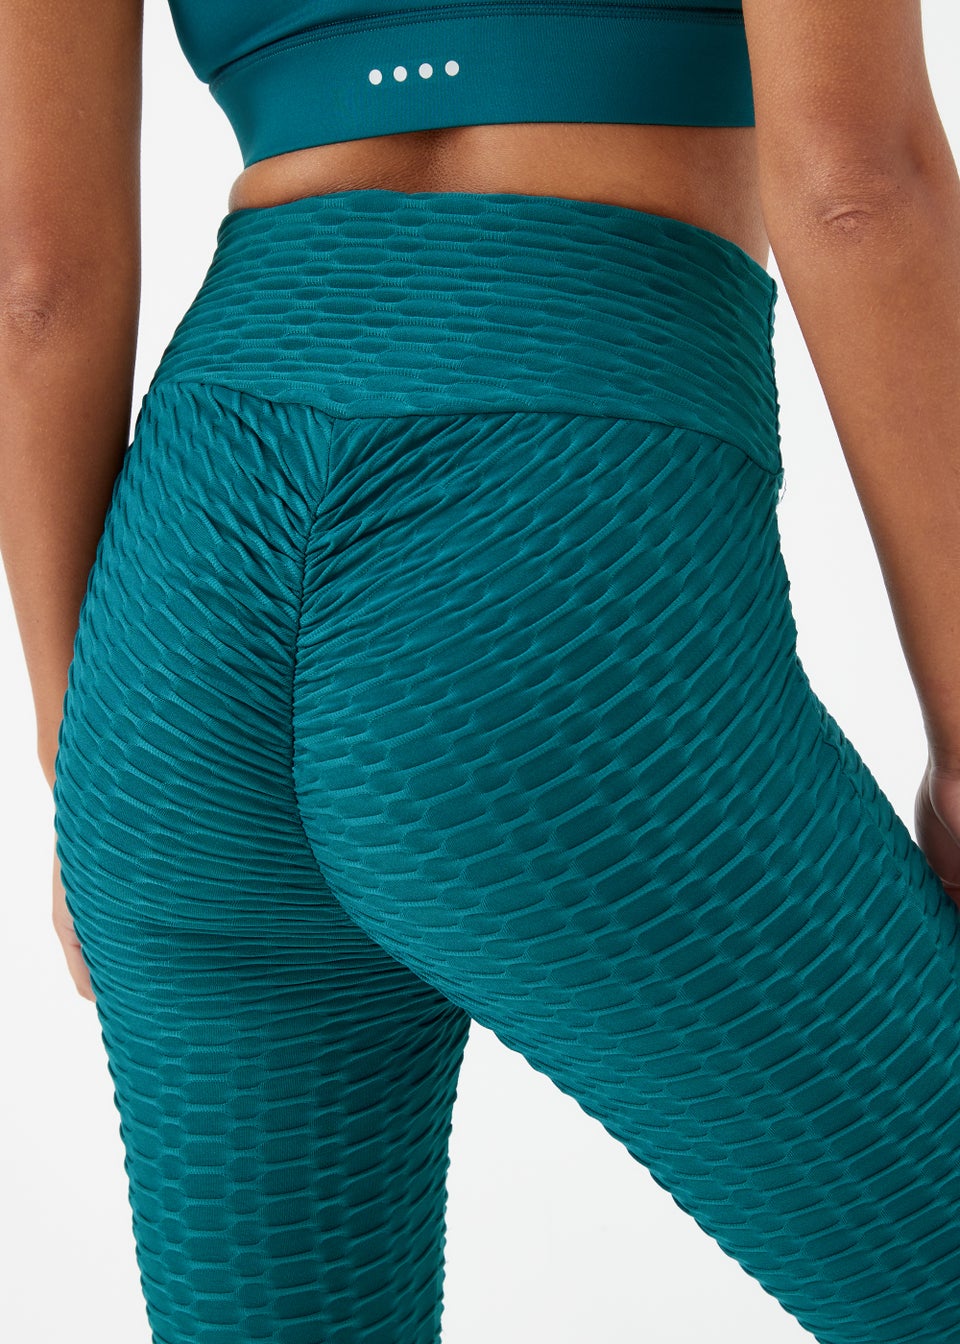 Souluxe Teal Ruched Sports Leggings - Matalan